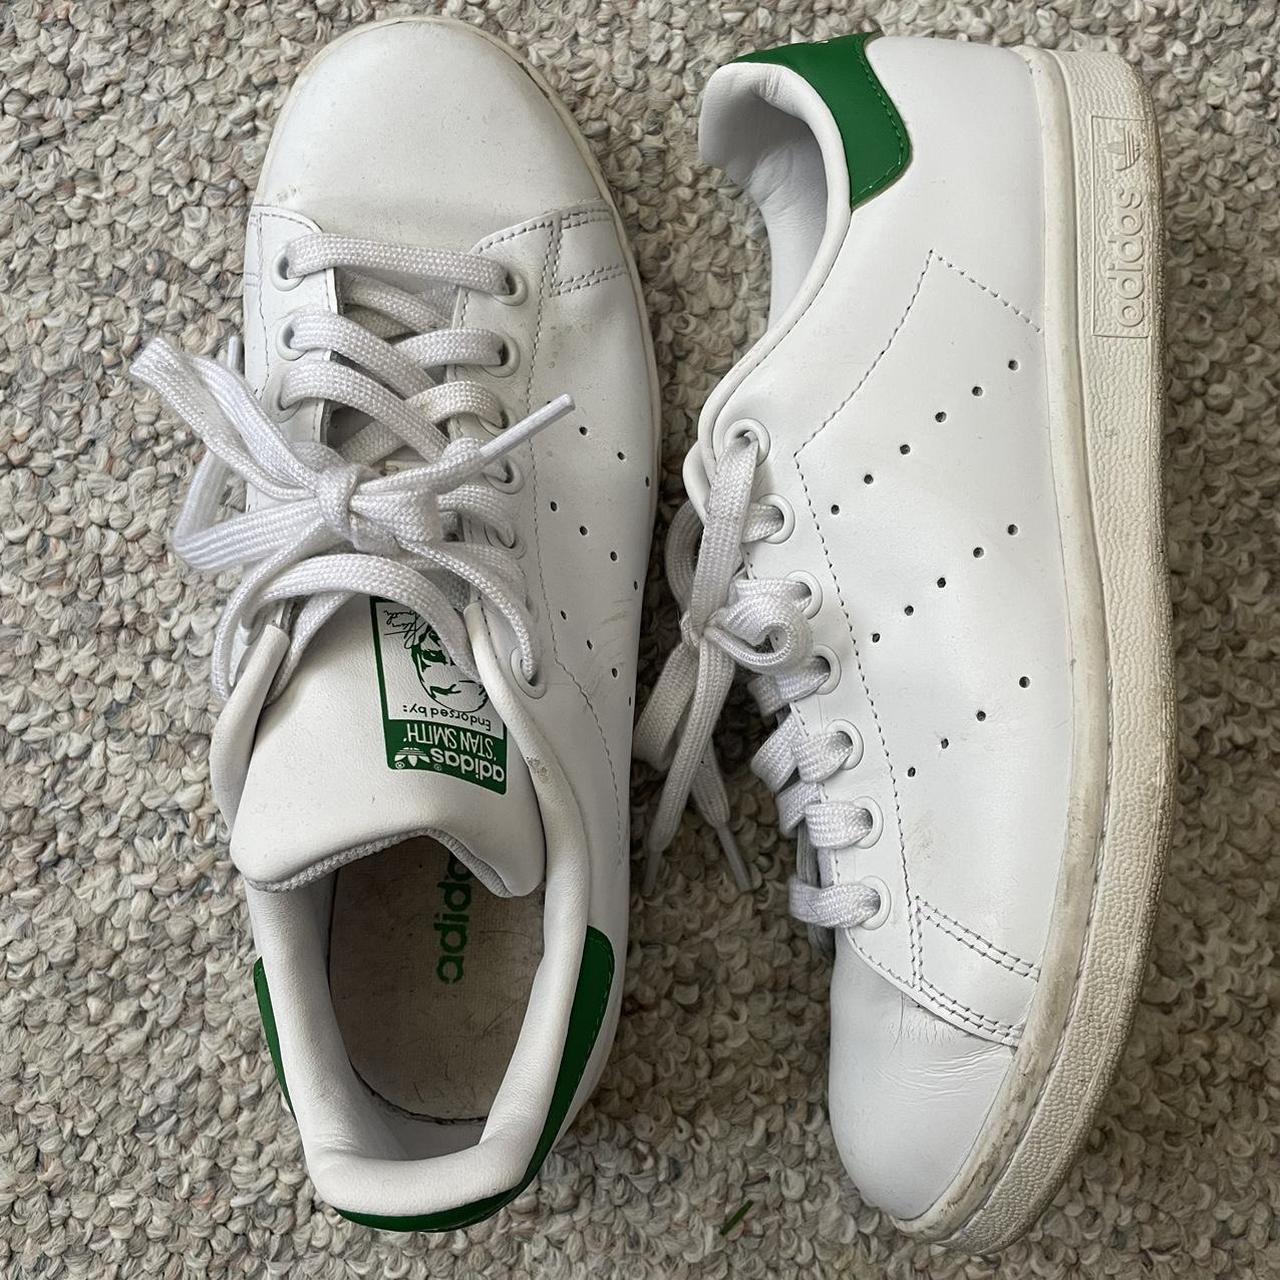 Adidas Women's Green and White Trainers